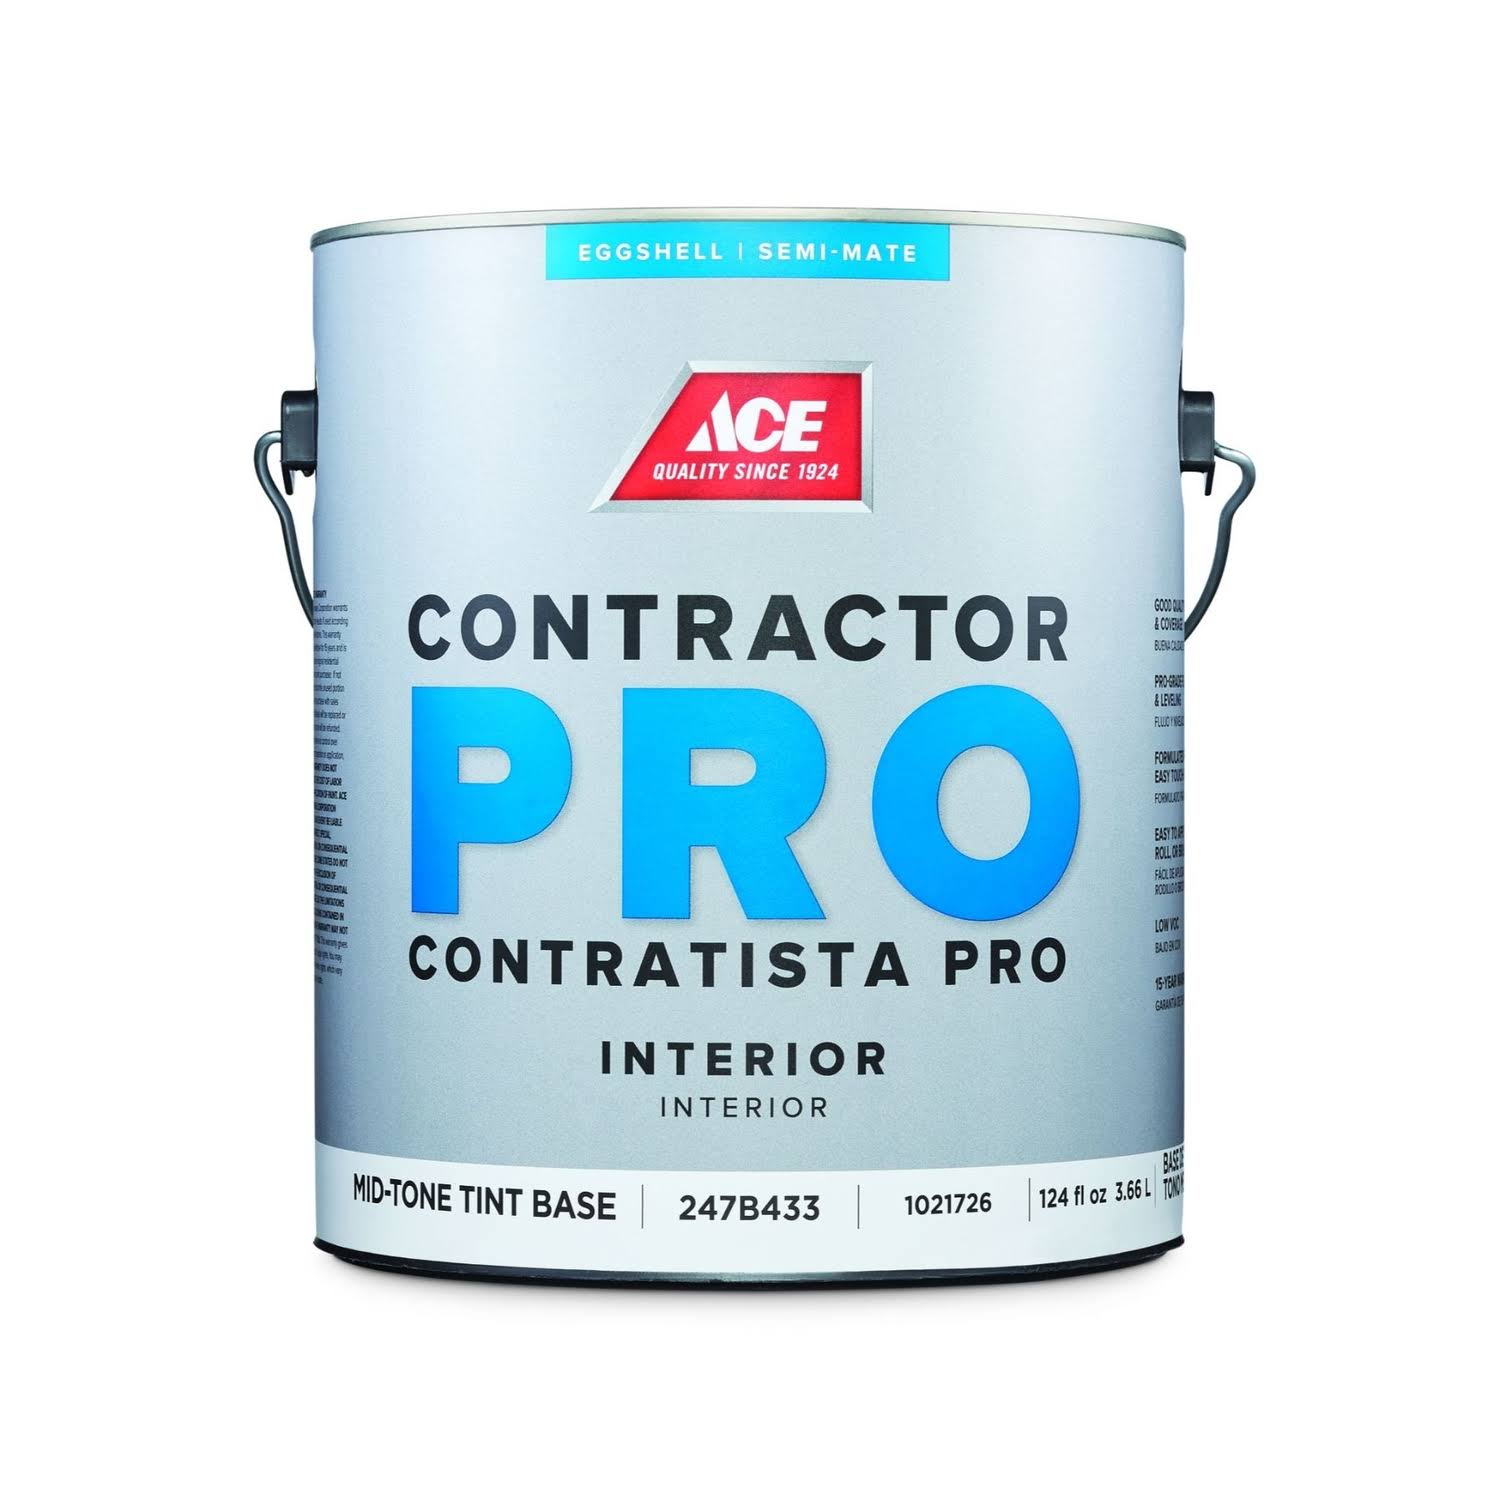 Ace Contractor Pro Eggshell Tint Base Mid-tone Base Latex Paint Interior 1 gal.